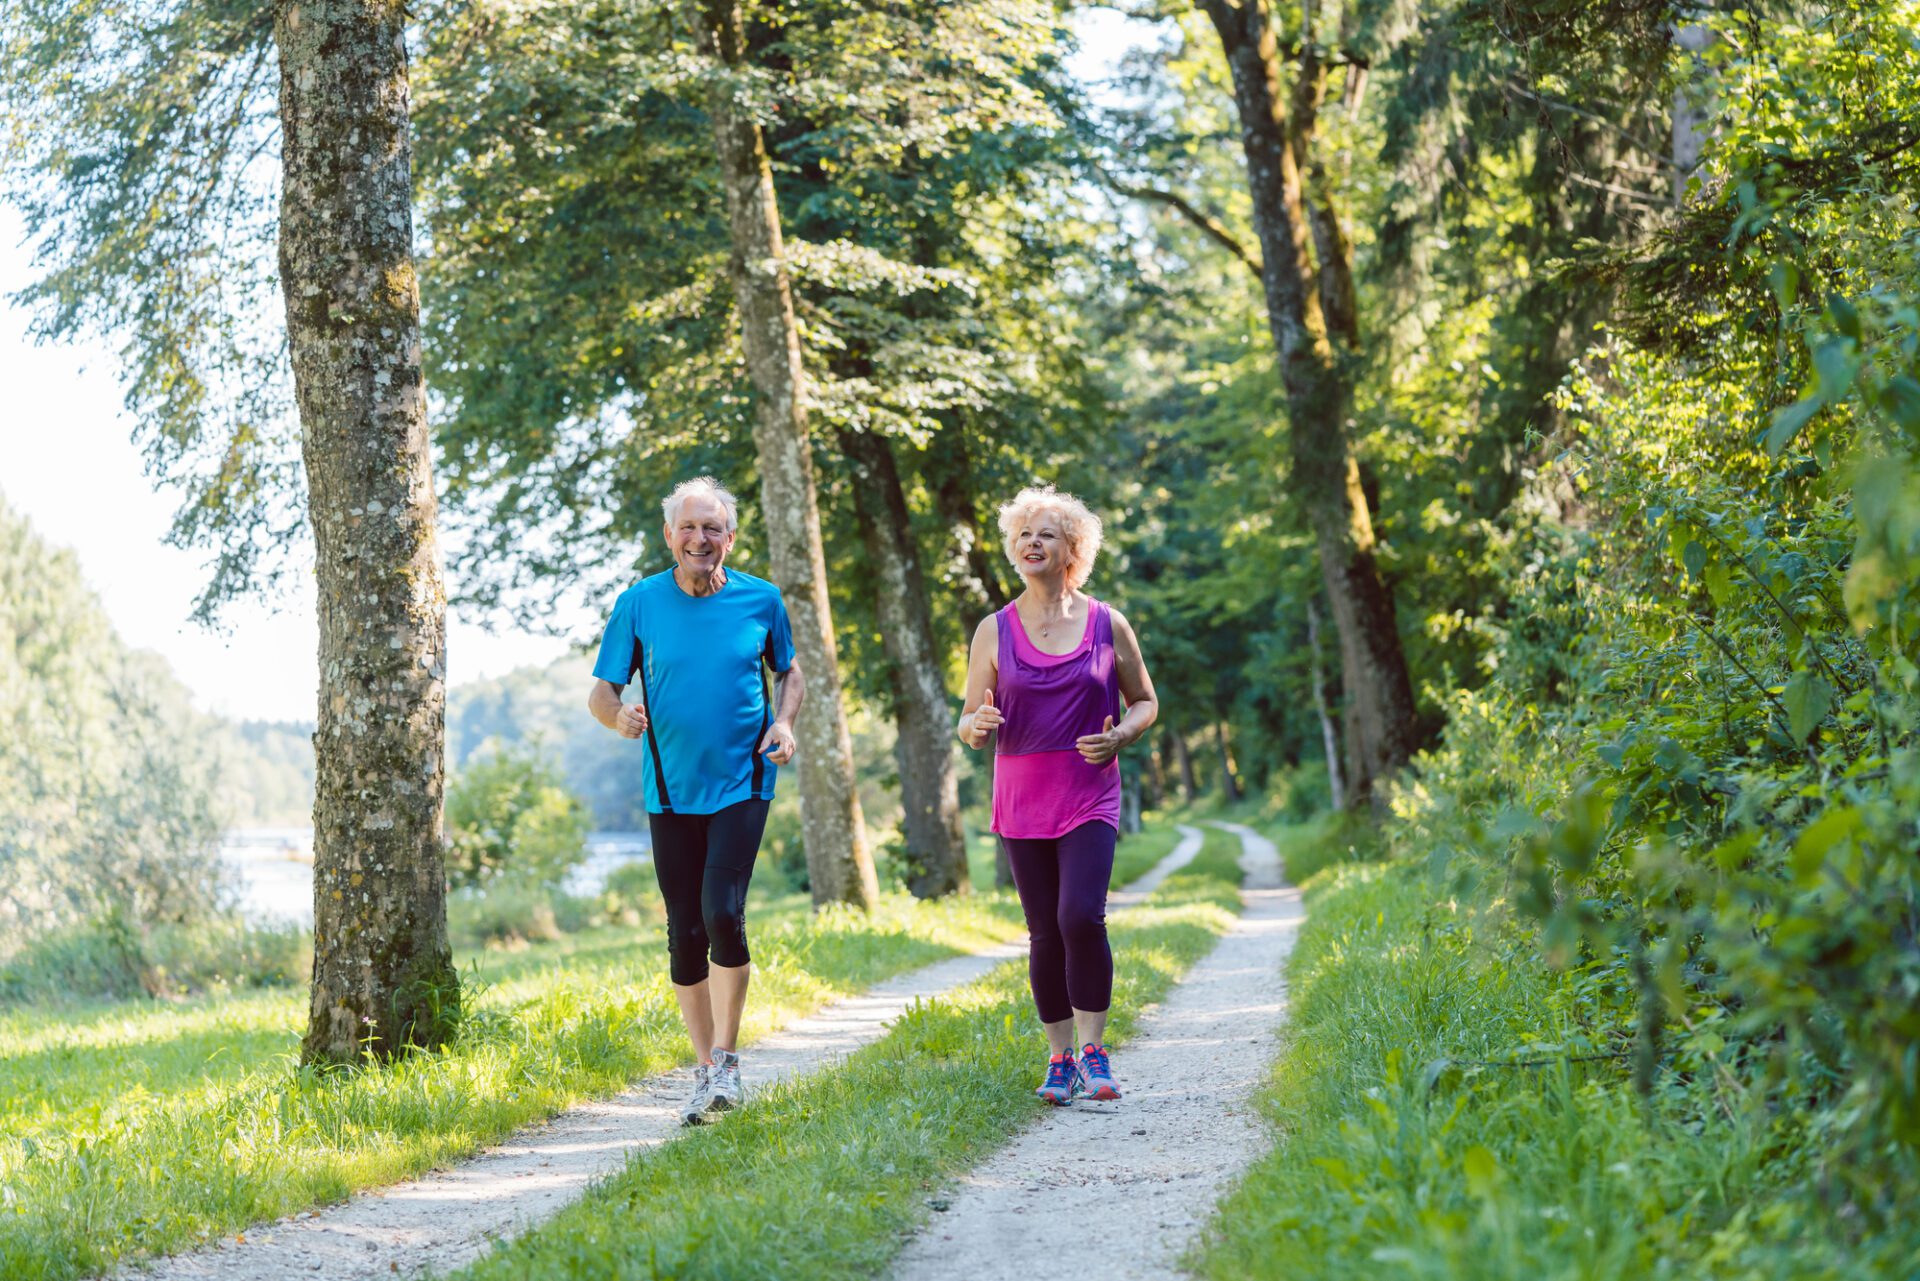 Two active seniors with a healthy lifestyle smiling while jogging